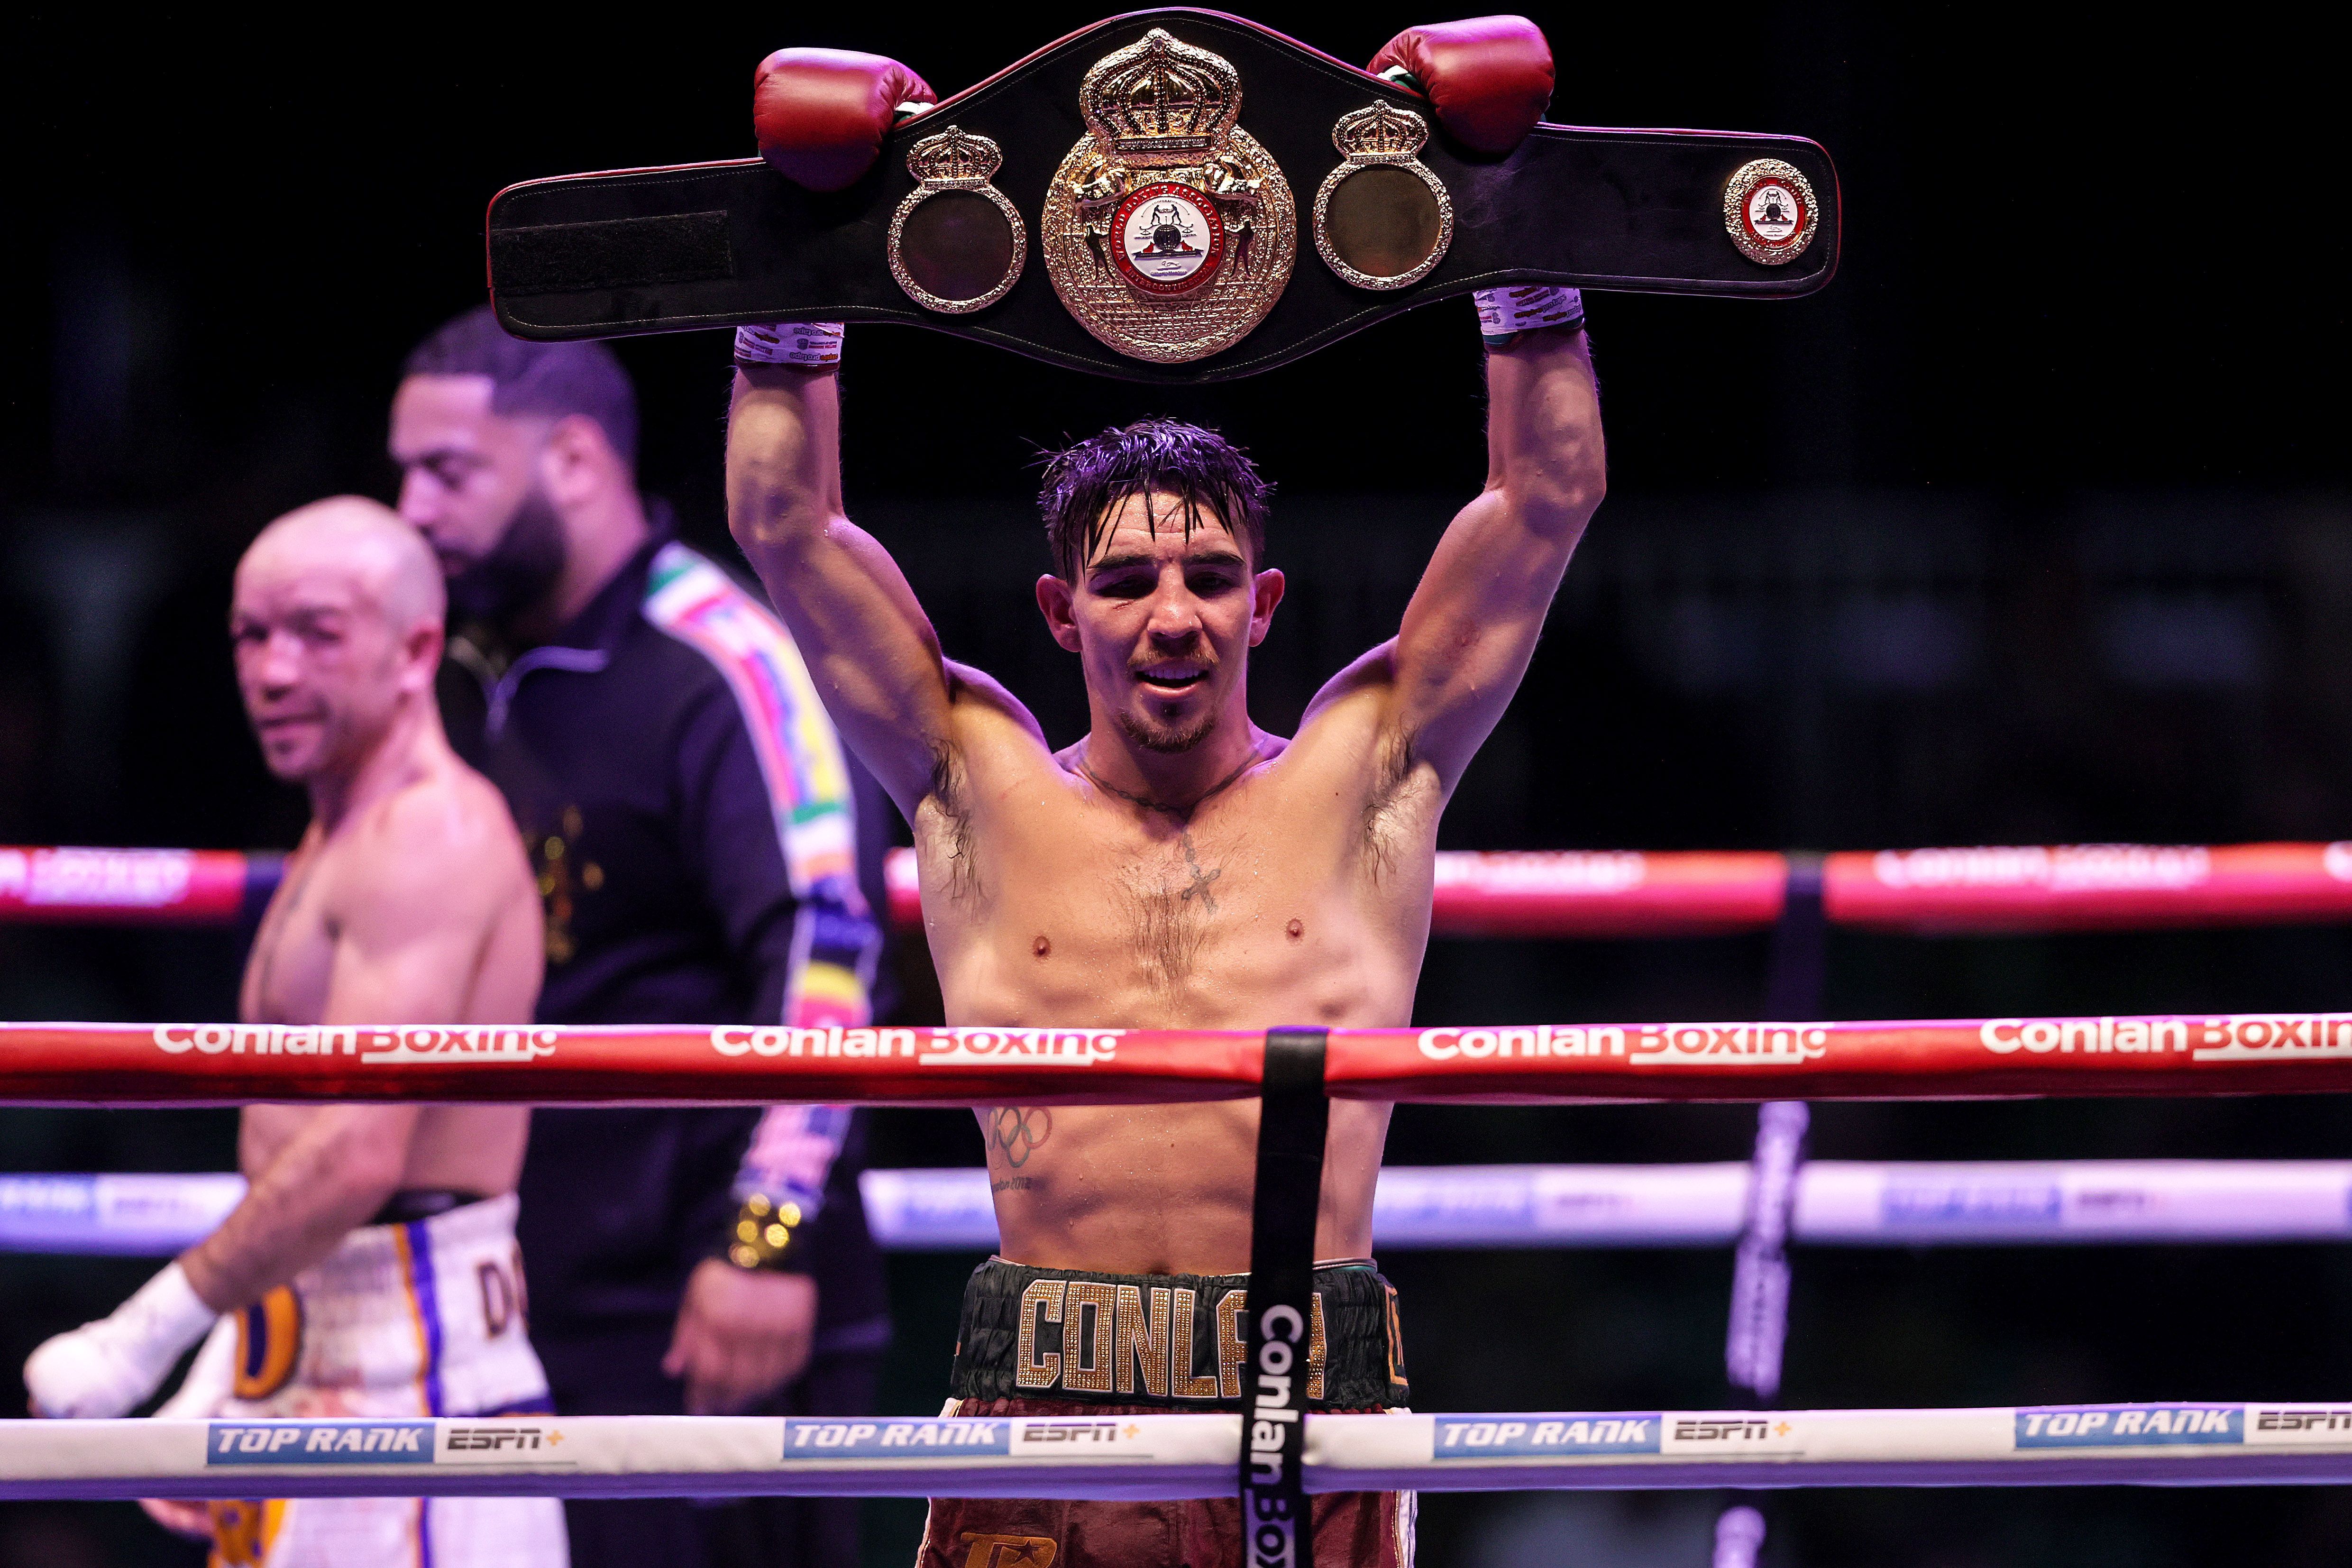 Michael Conlan could fight for the full WBA featherweight title in Belfast in December 